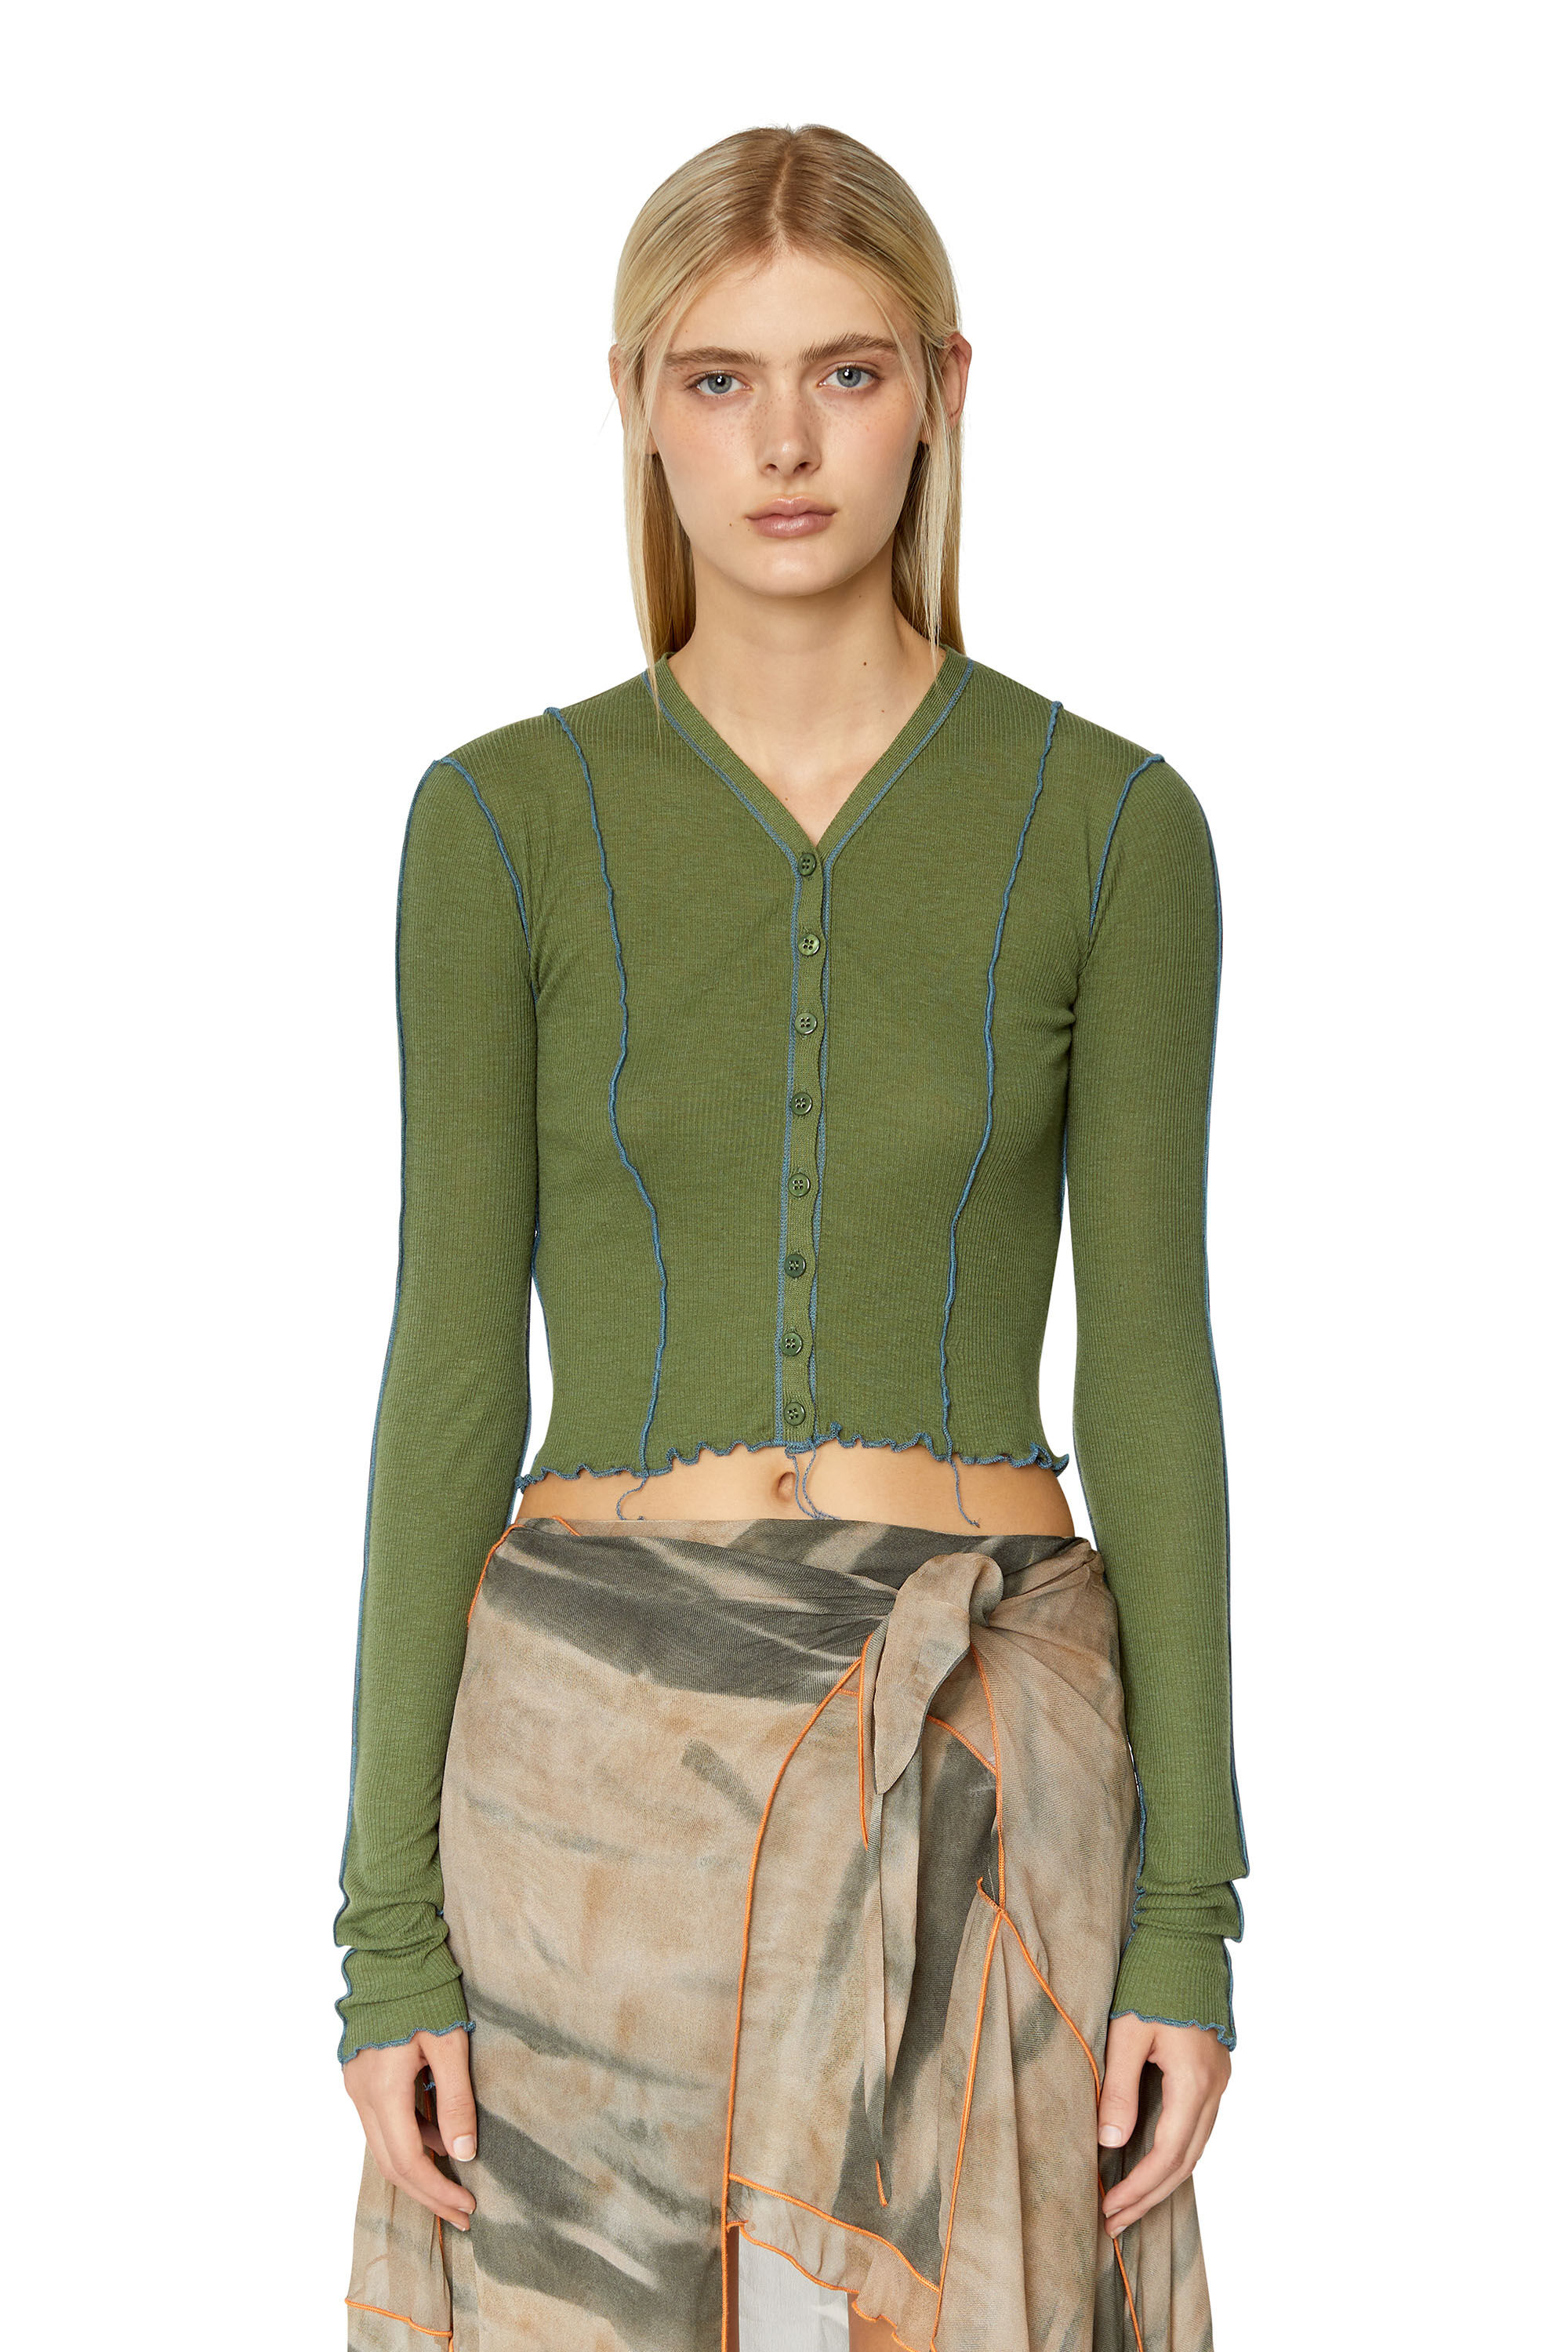 Diesel - T-RIBYEL-OPEN, Olive Green - Image 3